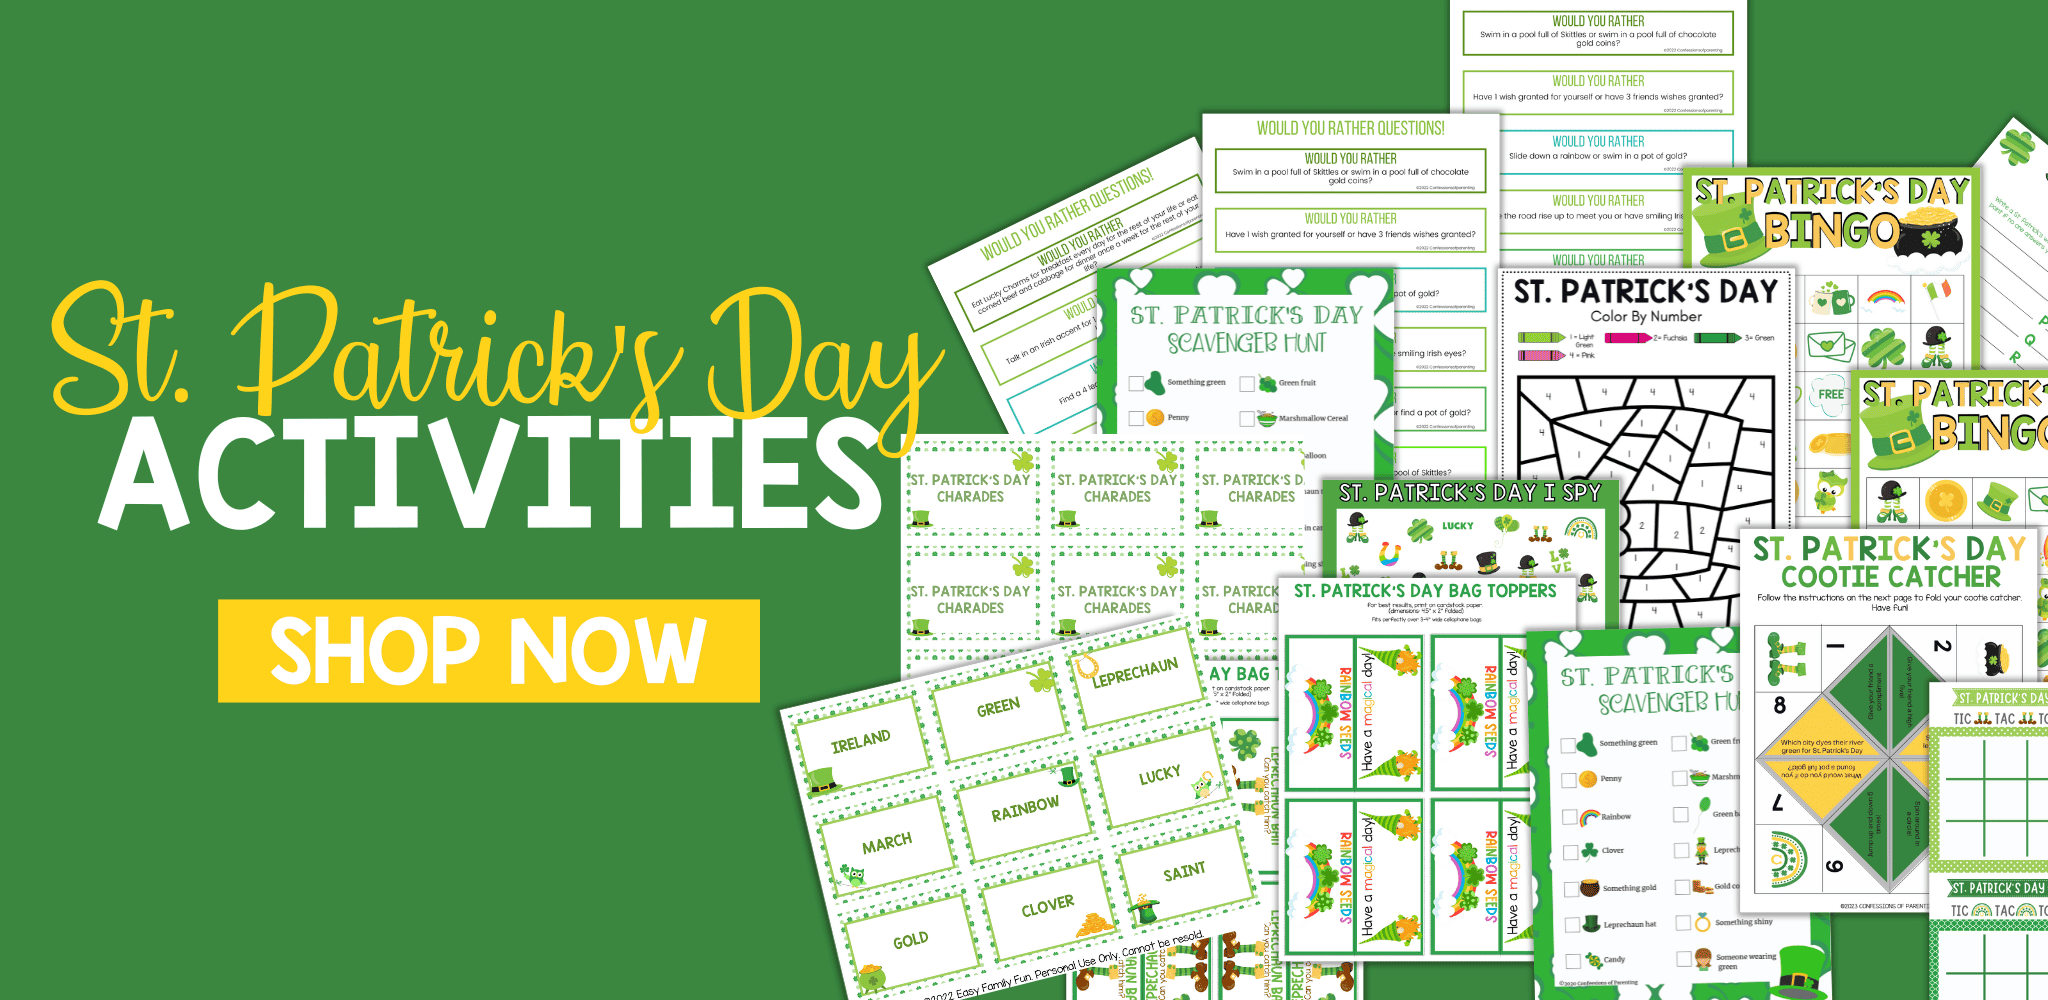 St Patricks Day Activities PDF with green background and yellow box that says shop now